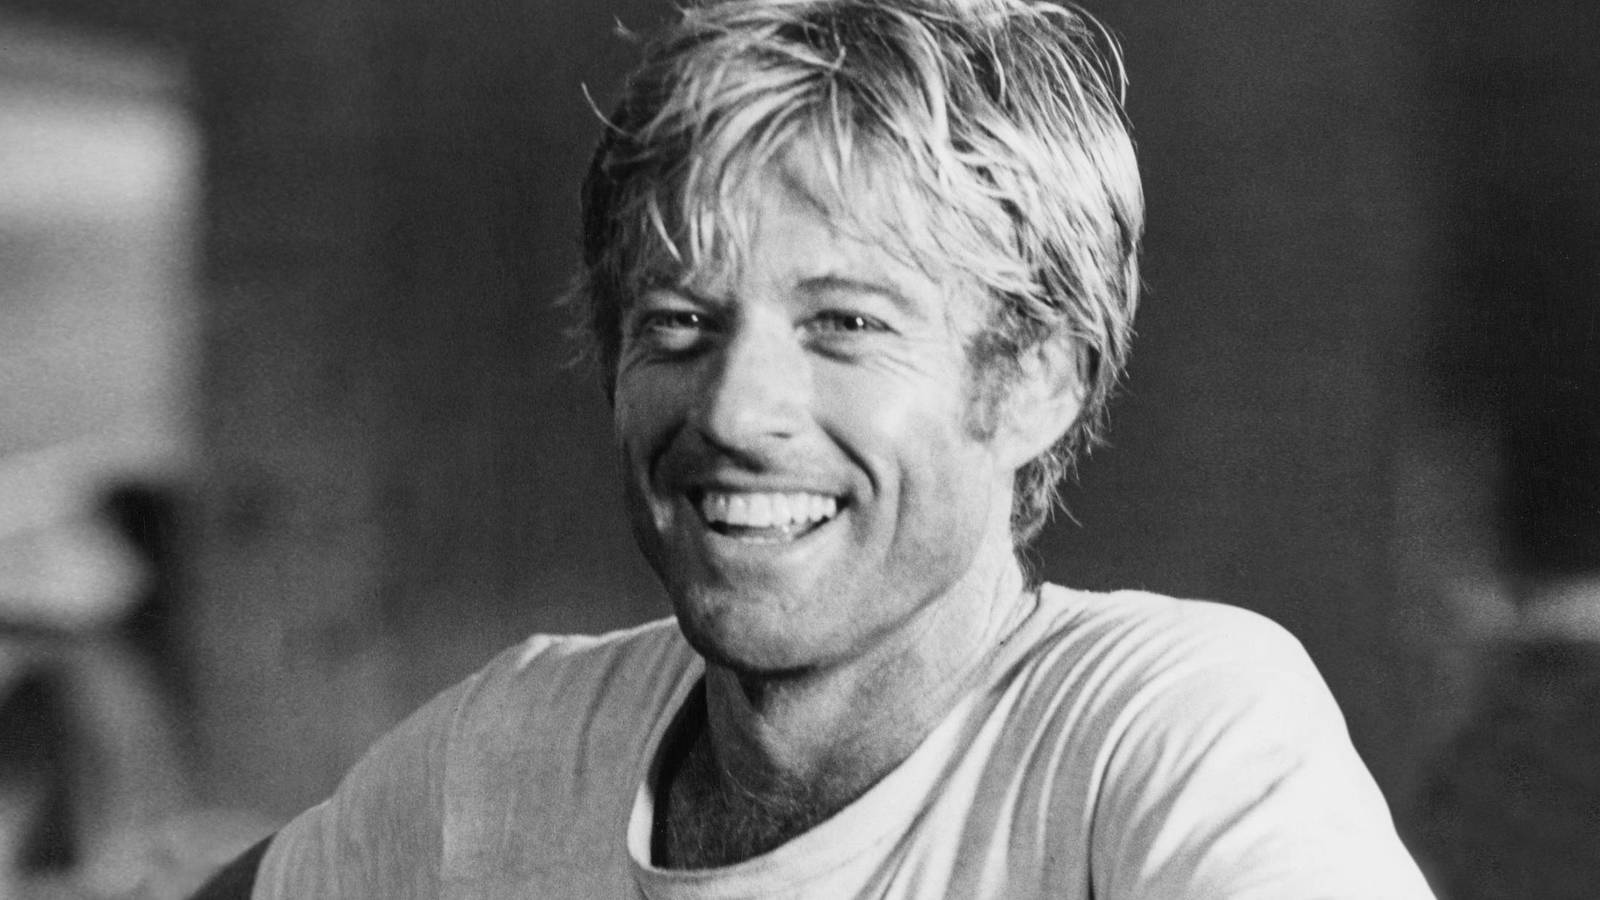 Robert Redford Young And Smiling Wallpaper